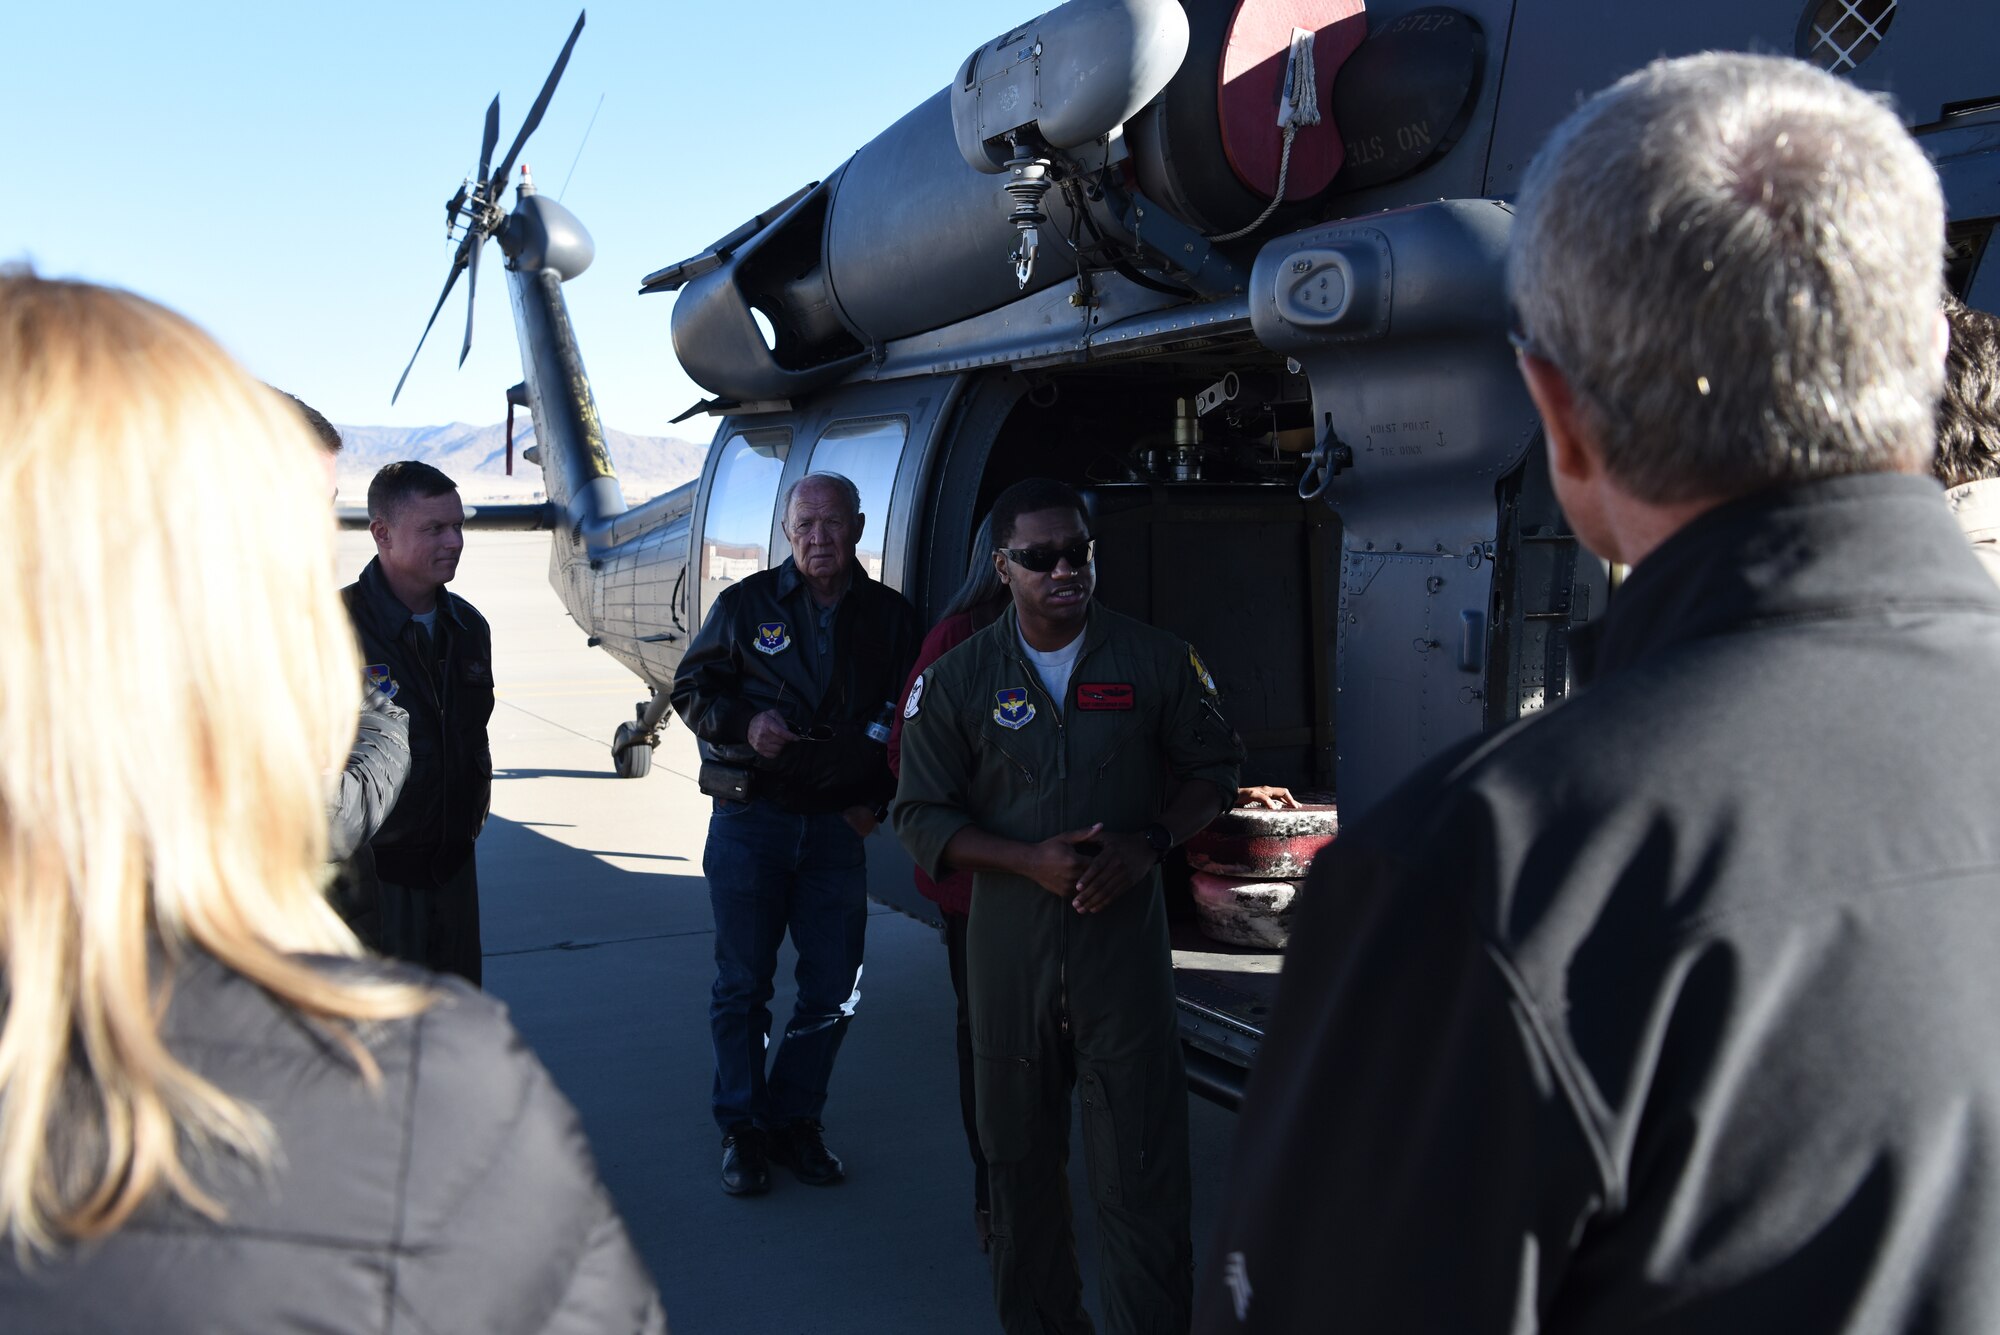 U.S. Air Force Staff Sgt. Christopher Myers, 512th Rescue Squadron special mission aviator, discusses the capabilities of the HH-60G Pave Hawk with members of the Kirtland Partnership Committee at Kirtland Air Force Base, N.M., Nov. 26, 2018.  The KPC is a local civic group that advocates for Team Kirtland and its part of the National Security Complex. (U.S. Air Force photo by Senior Airman Eli Chevalier)